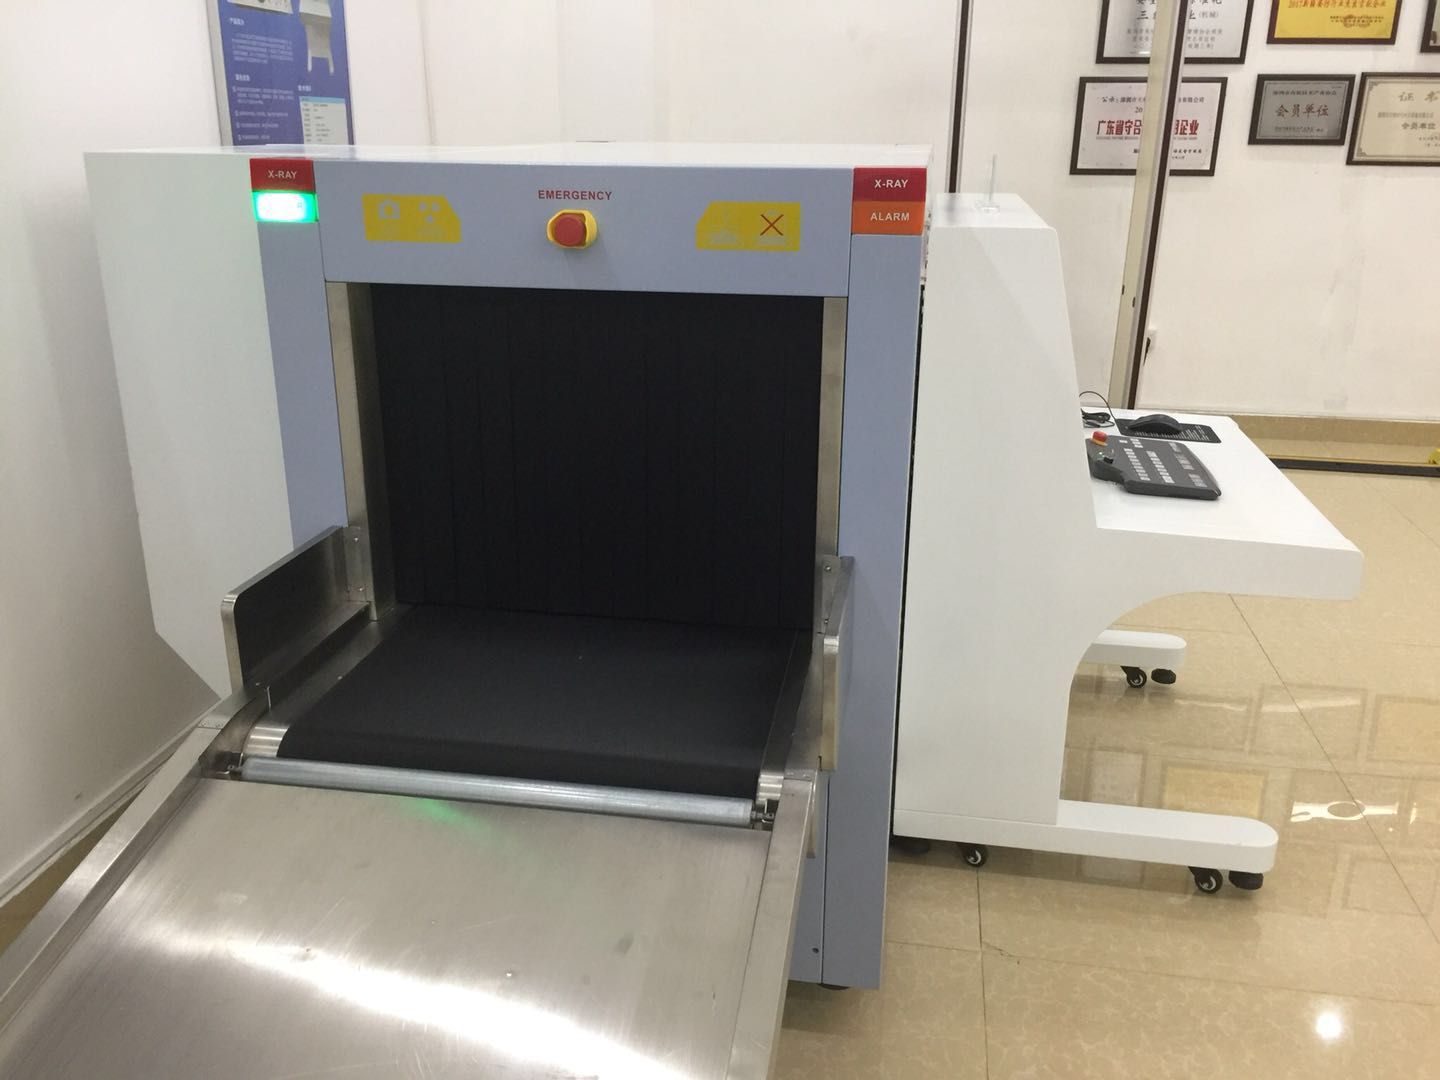 X-ray Metal Detector Screening Scanning Machine Airport Security Inspection Explosives with UK Detector Board